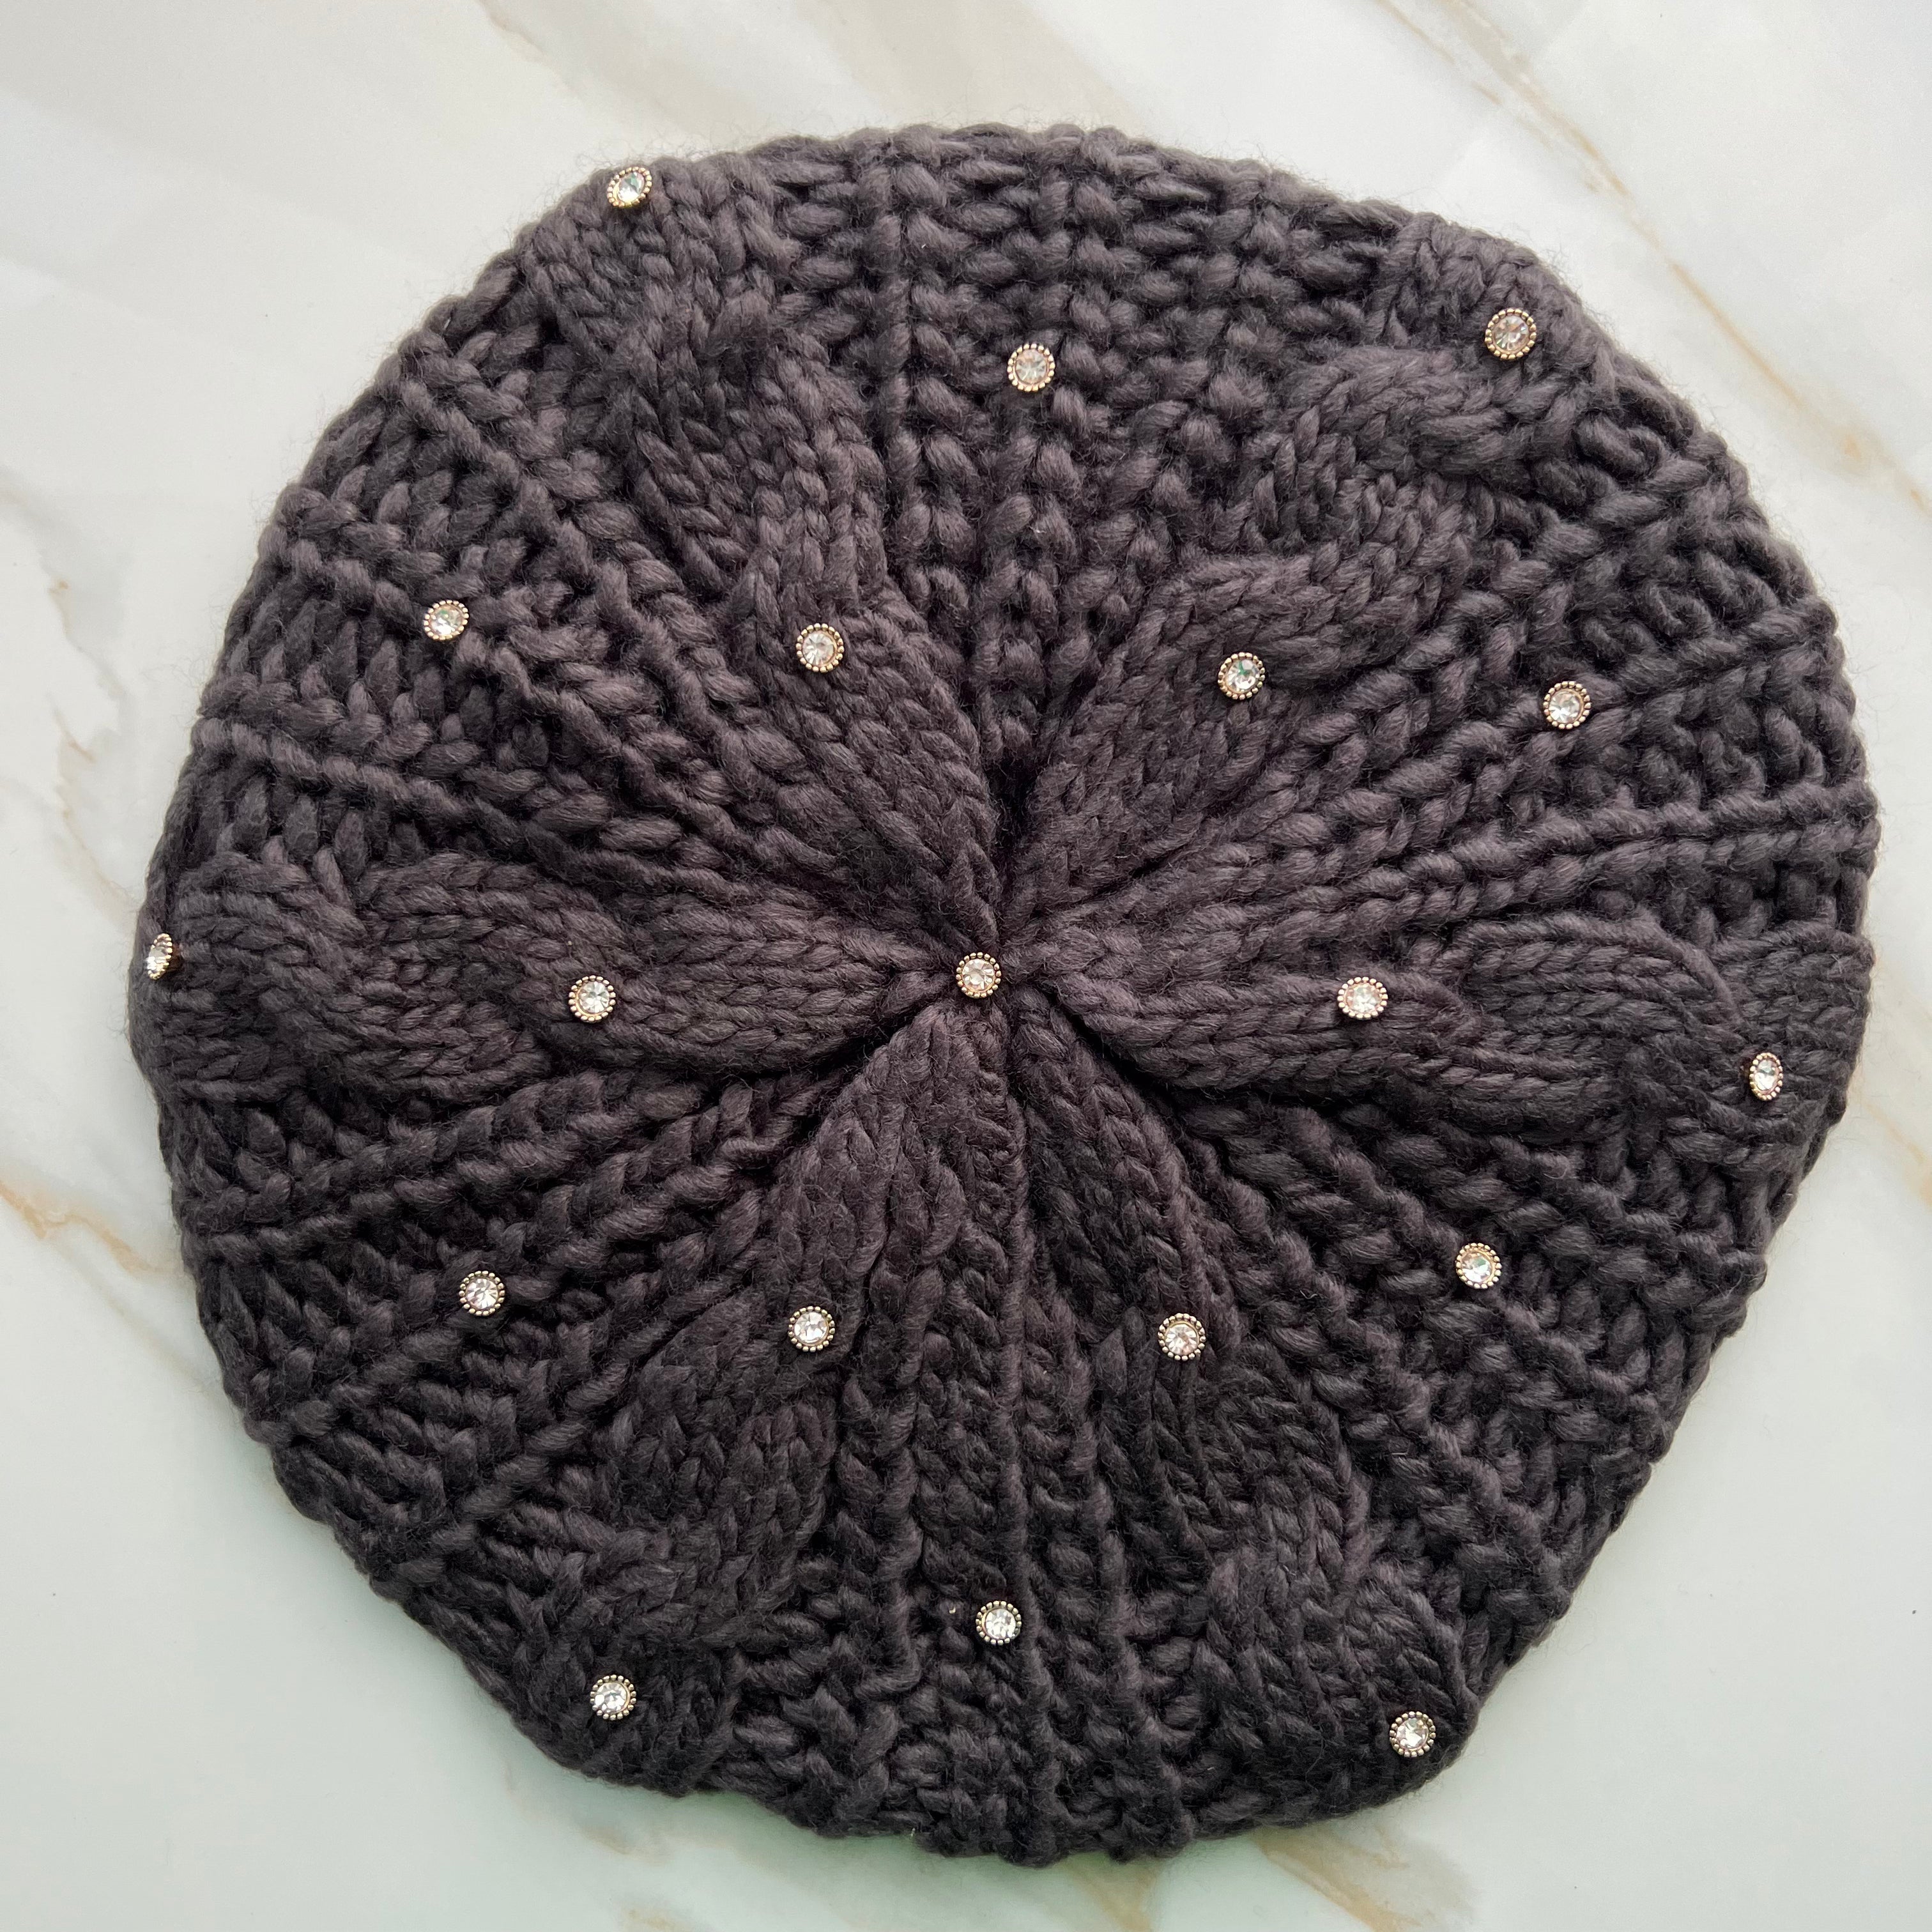 Isla Crystal Cable Knit Beret